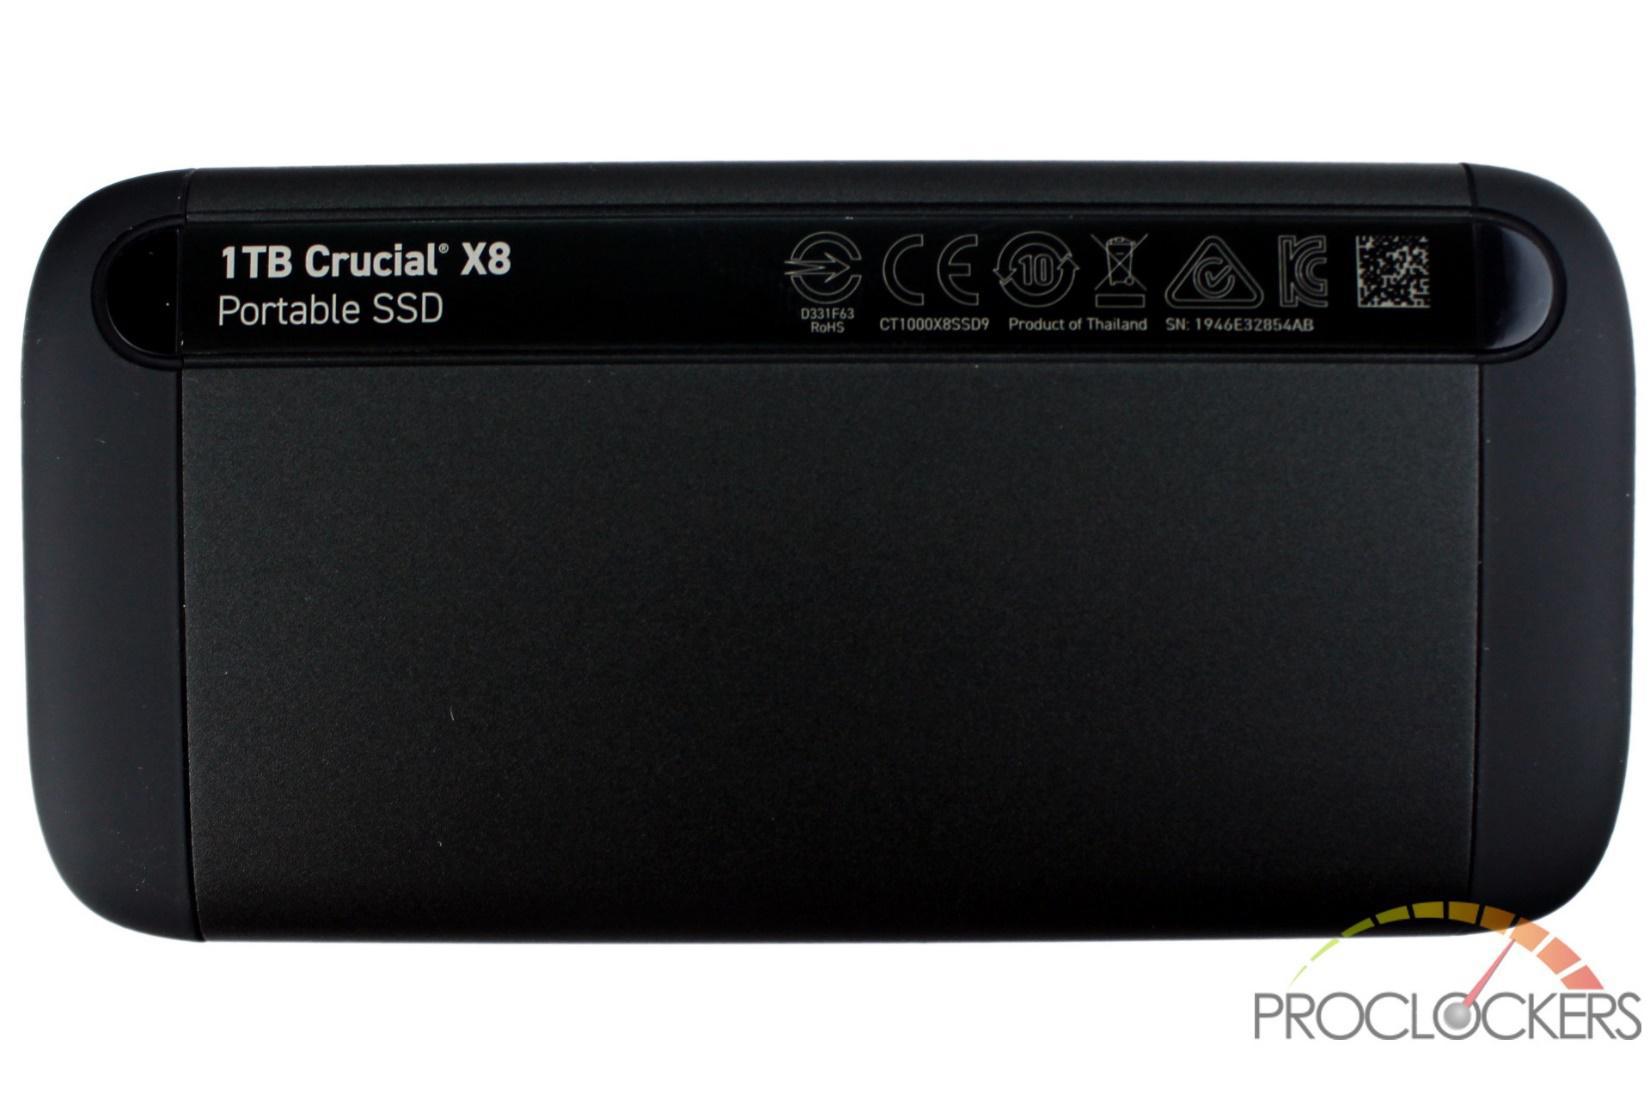 Crucial X8 1TB Portable SSD Review | Page 3 of 6 | PROCLOCKERS